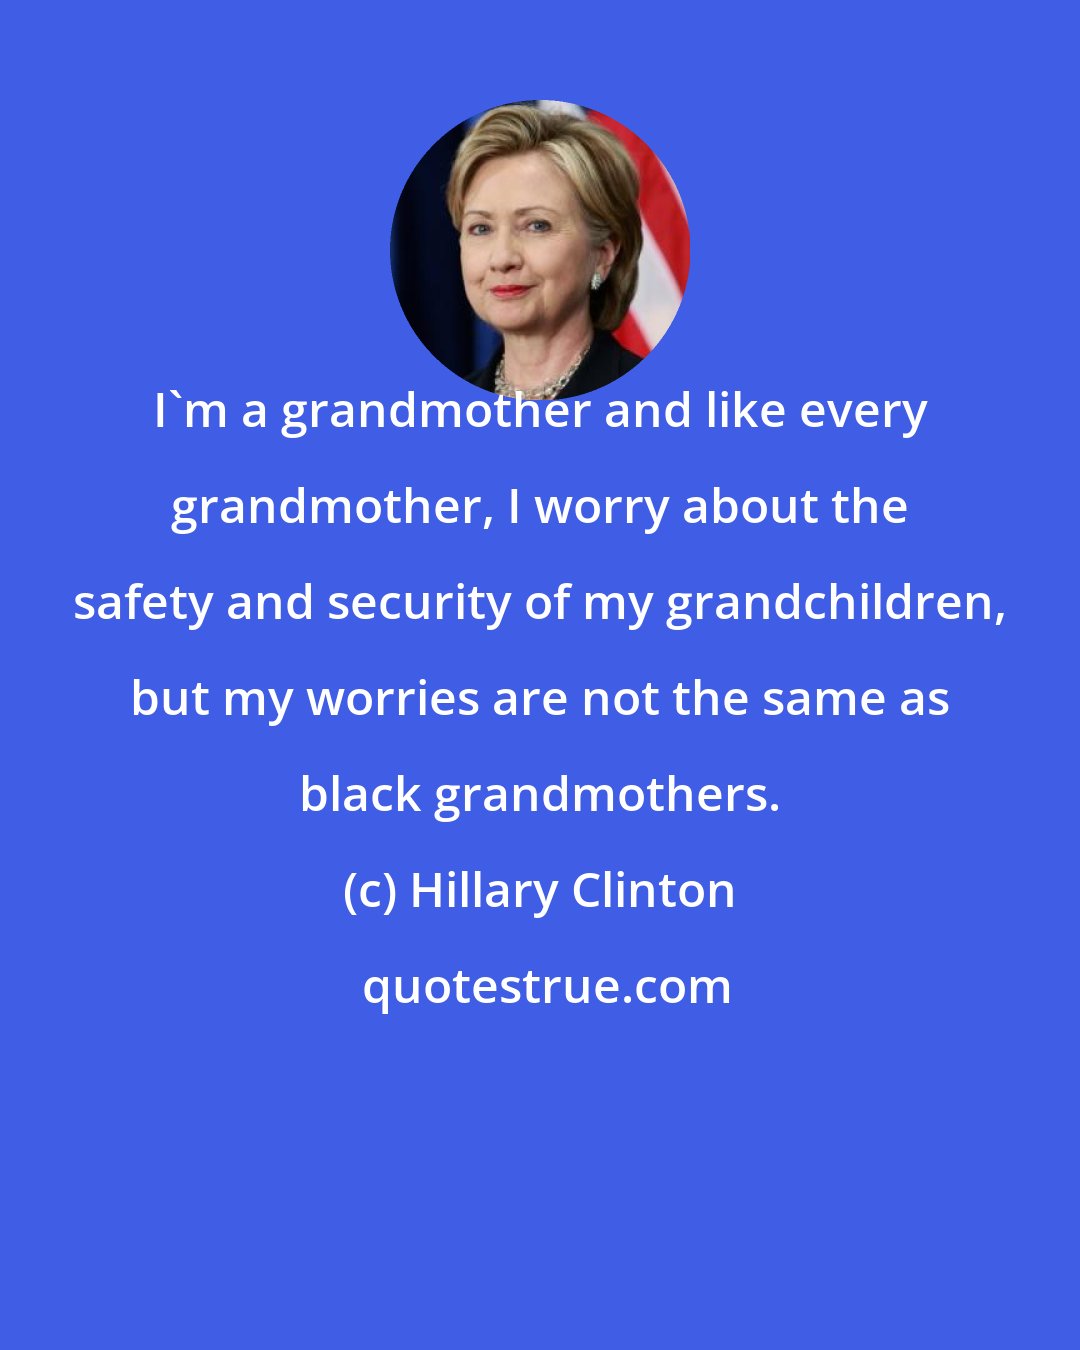 Hillary Clinton: I'm a grandmother and like every grandmother, I worry about the safety and security of my grandchildren, but my worries are not the same as black grandmothers.